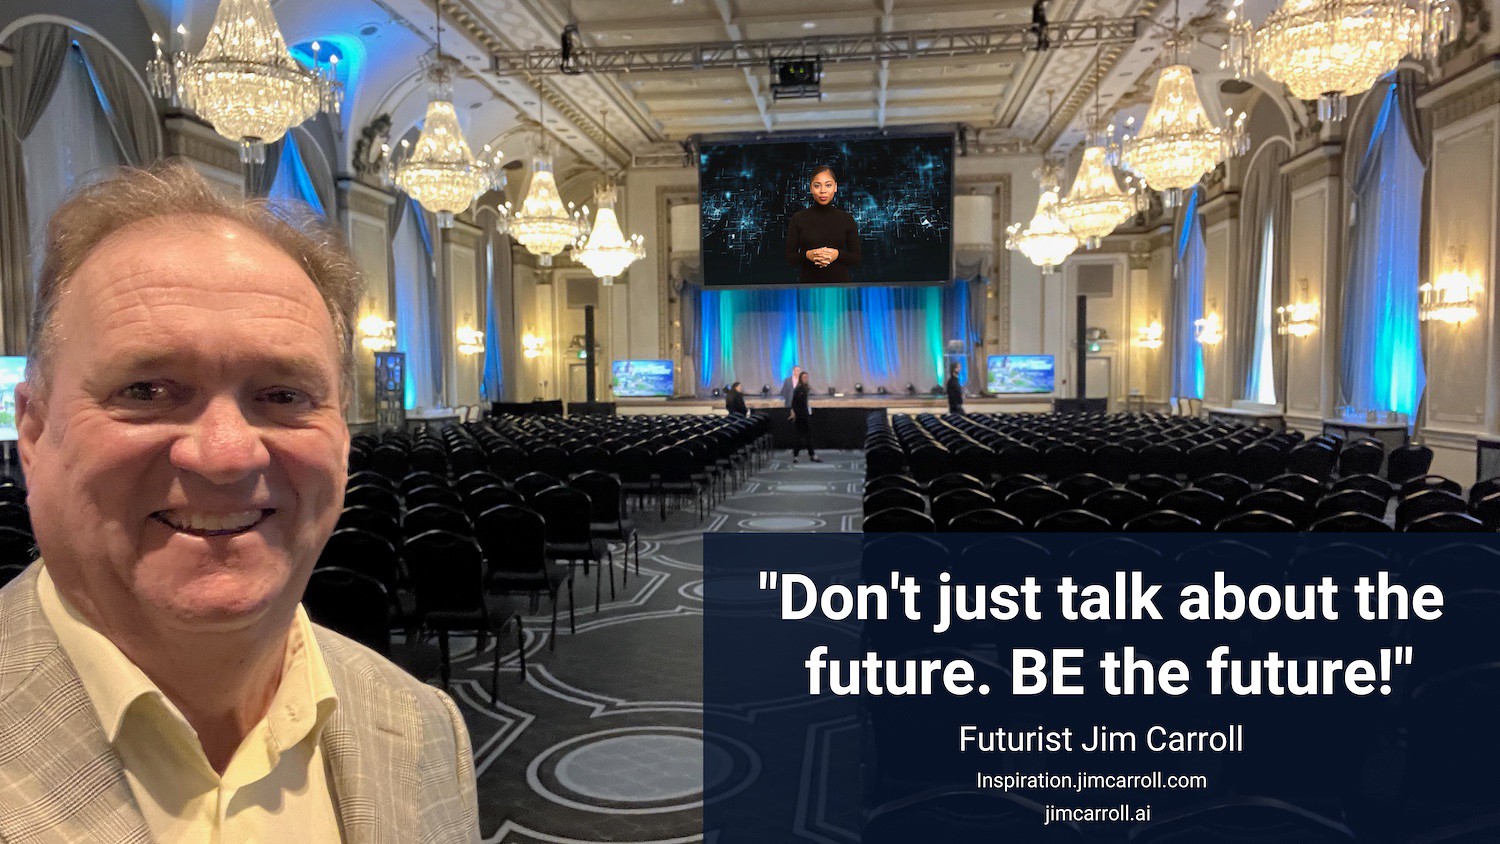 Blank "Don't just talk about the future. BE the future!" - Futurist Jim CarrollCompany Profile Business Presentation in Navy Blue Black and White Simple Corporate Dark Style - 1